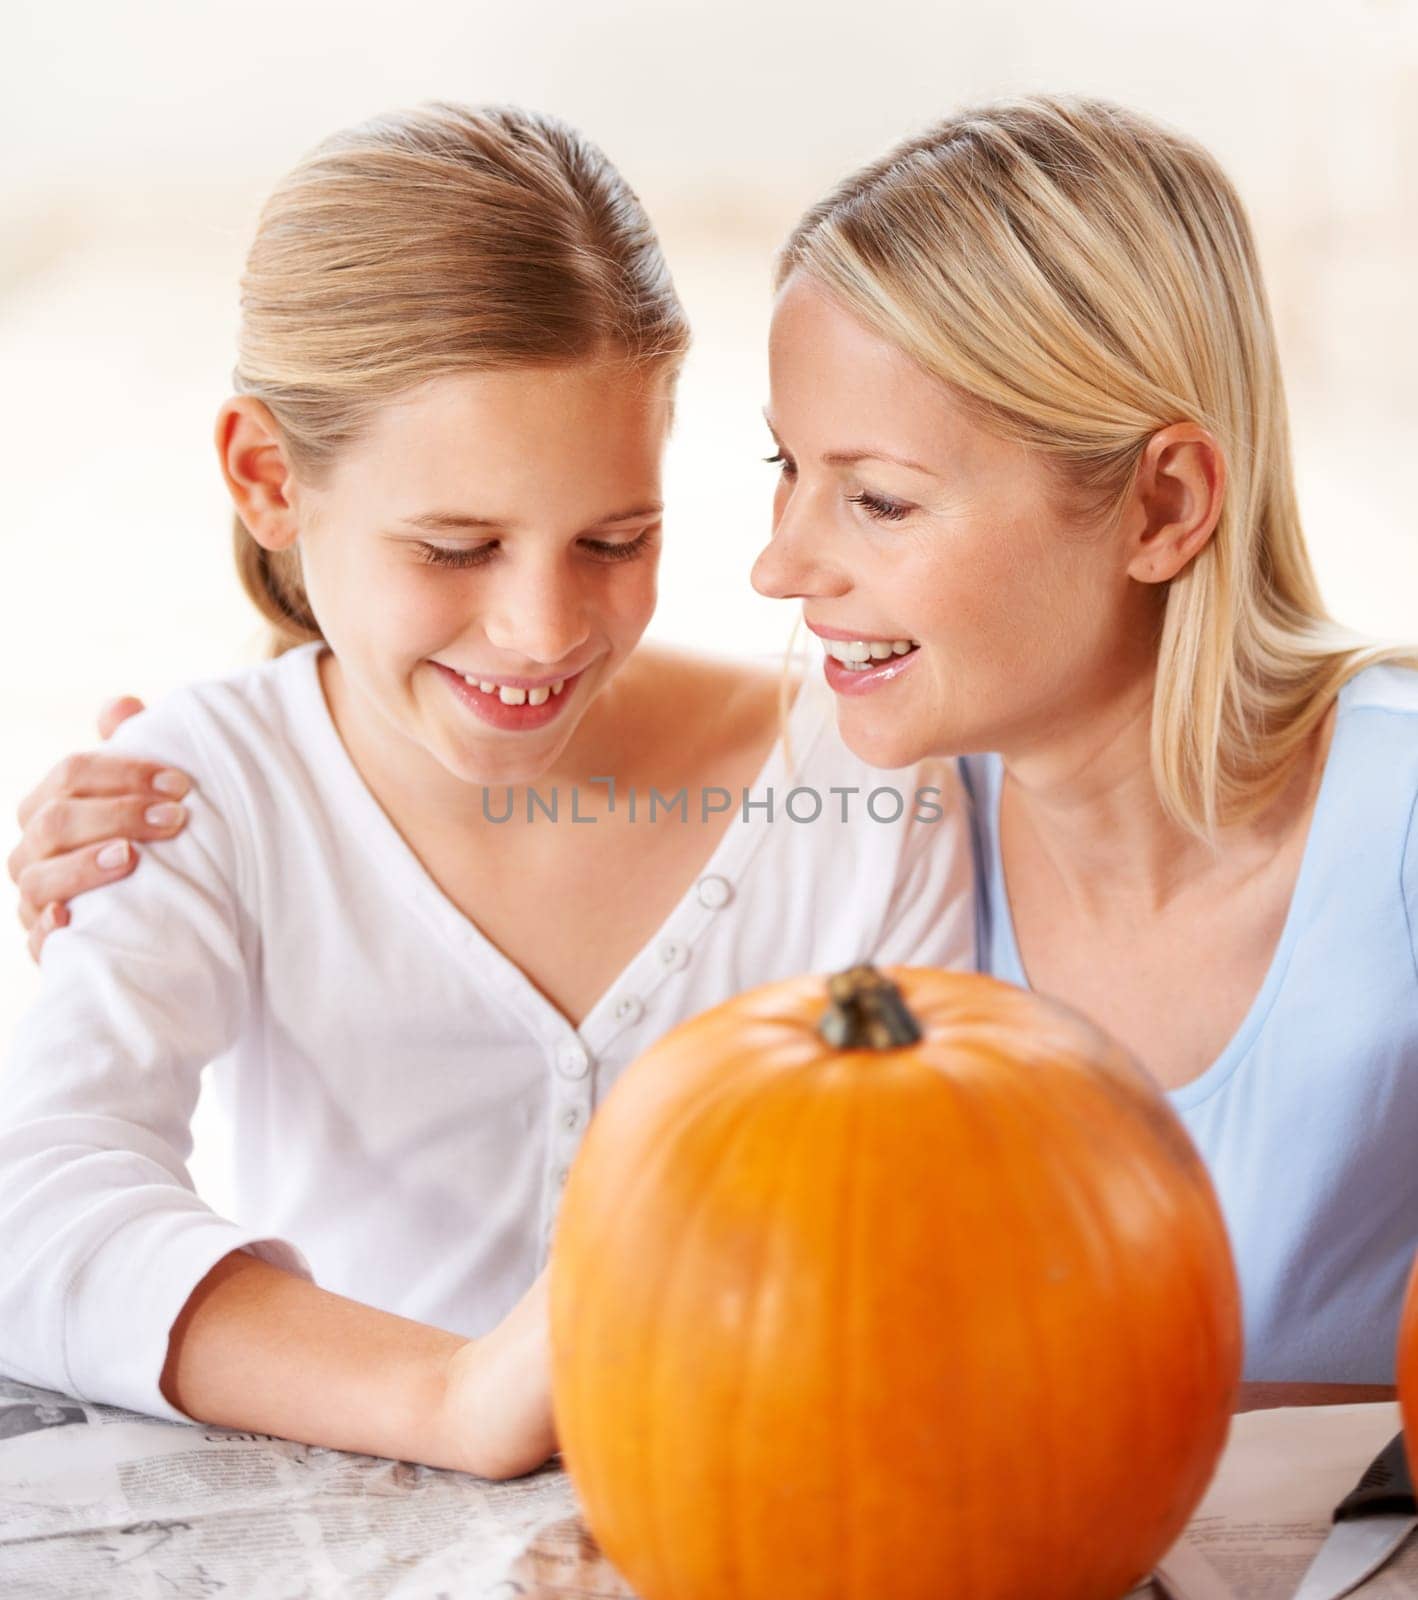 Your pumpkin is going to look amazing. a mother and daughter carving a pumpkin together